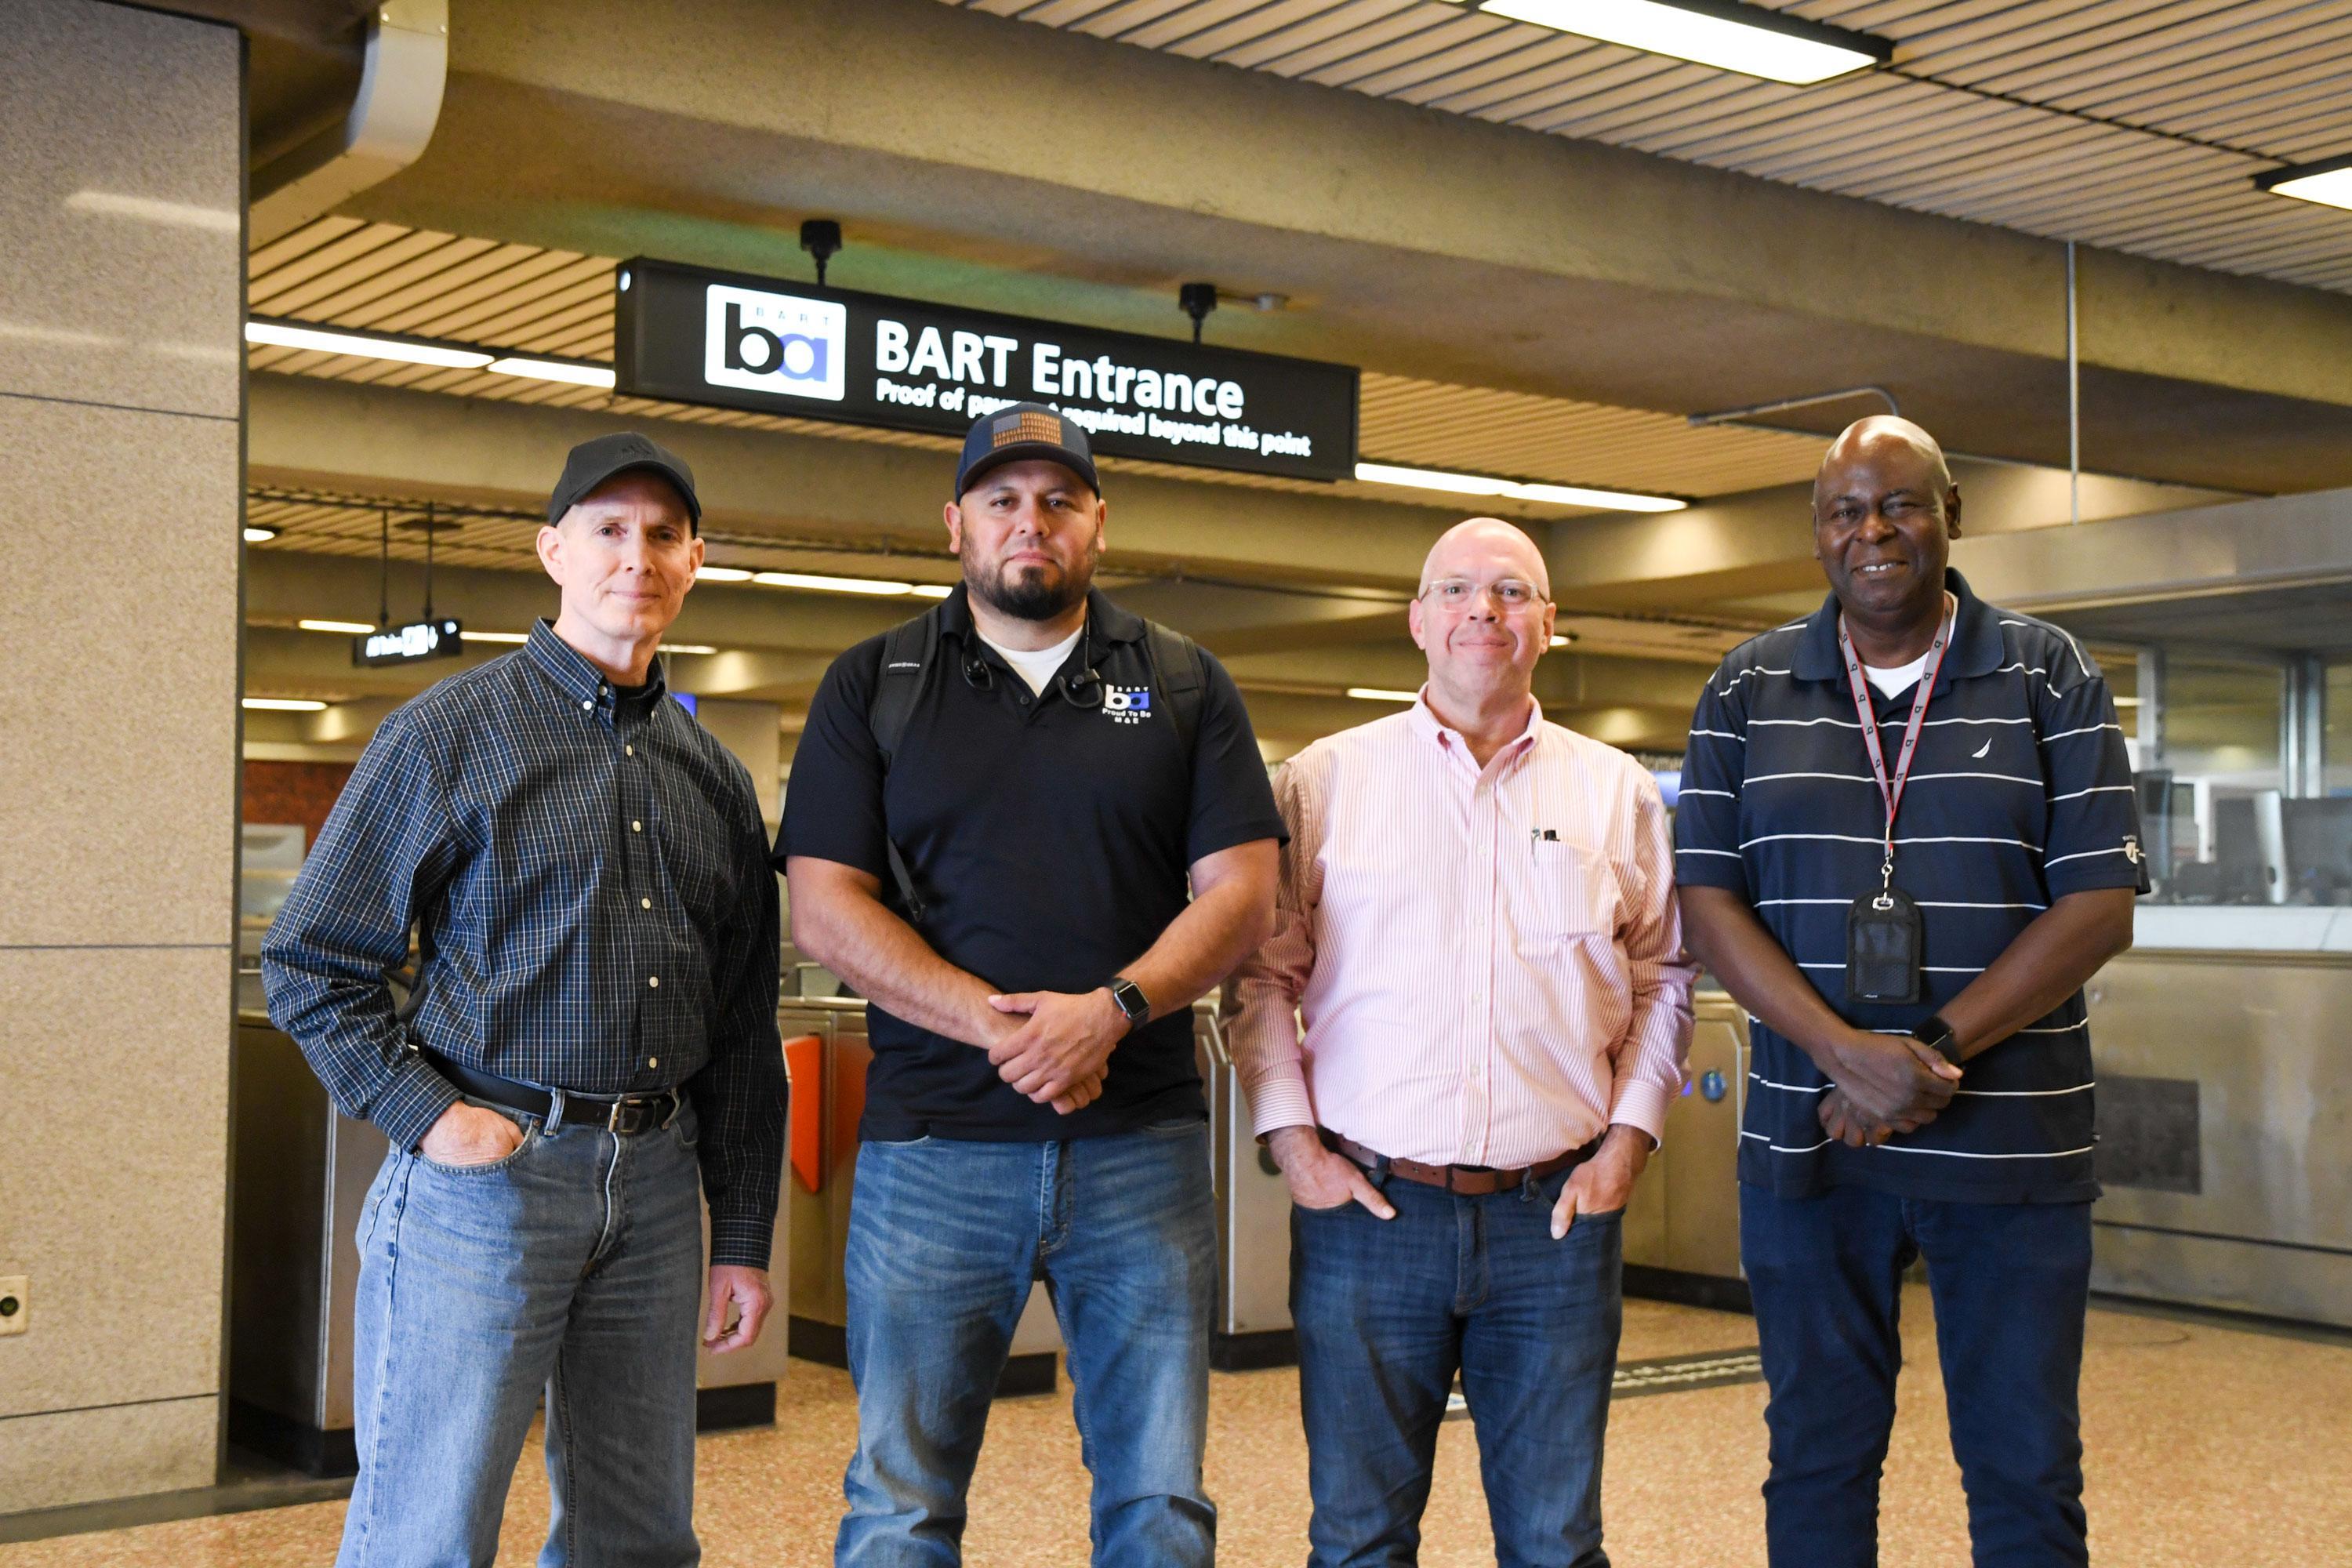 Quality assurance engineers at BART